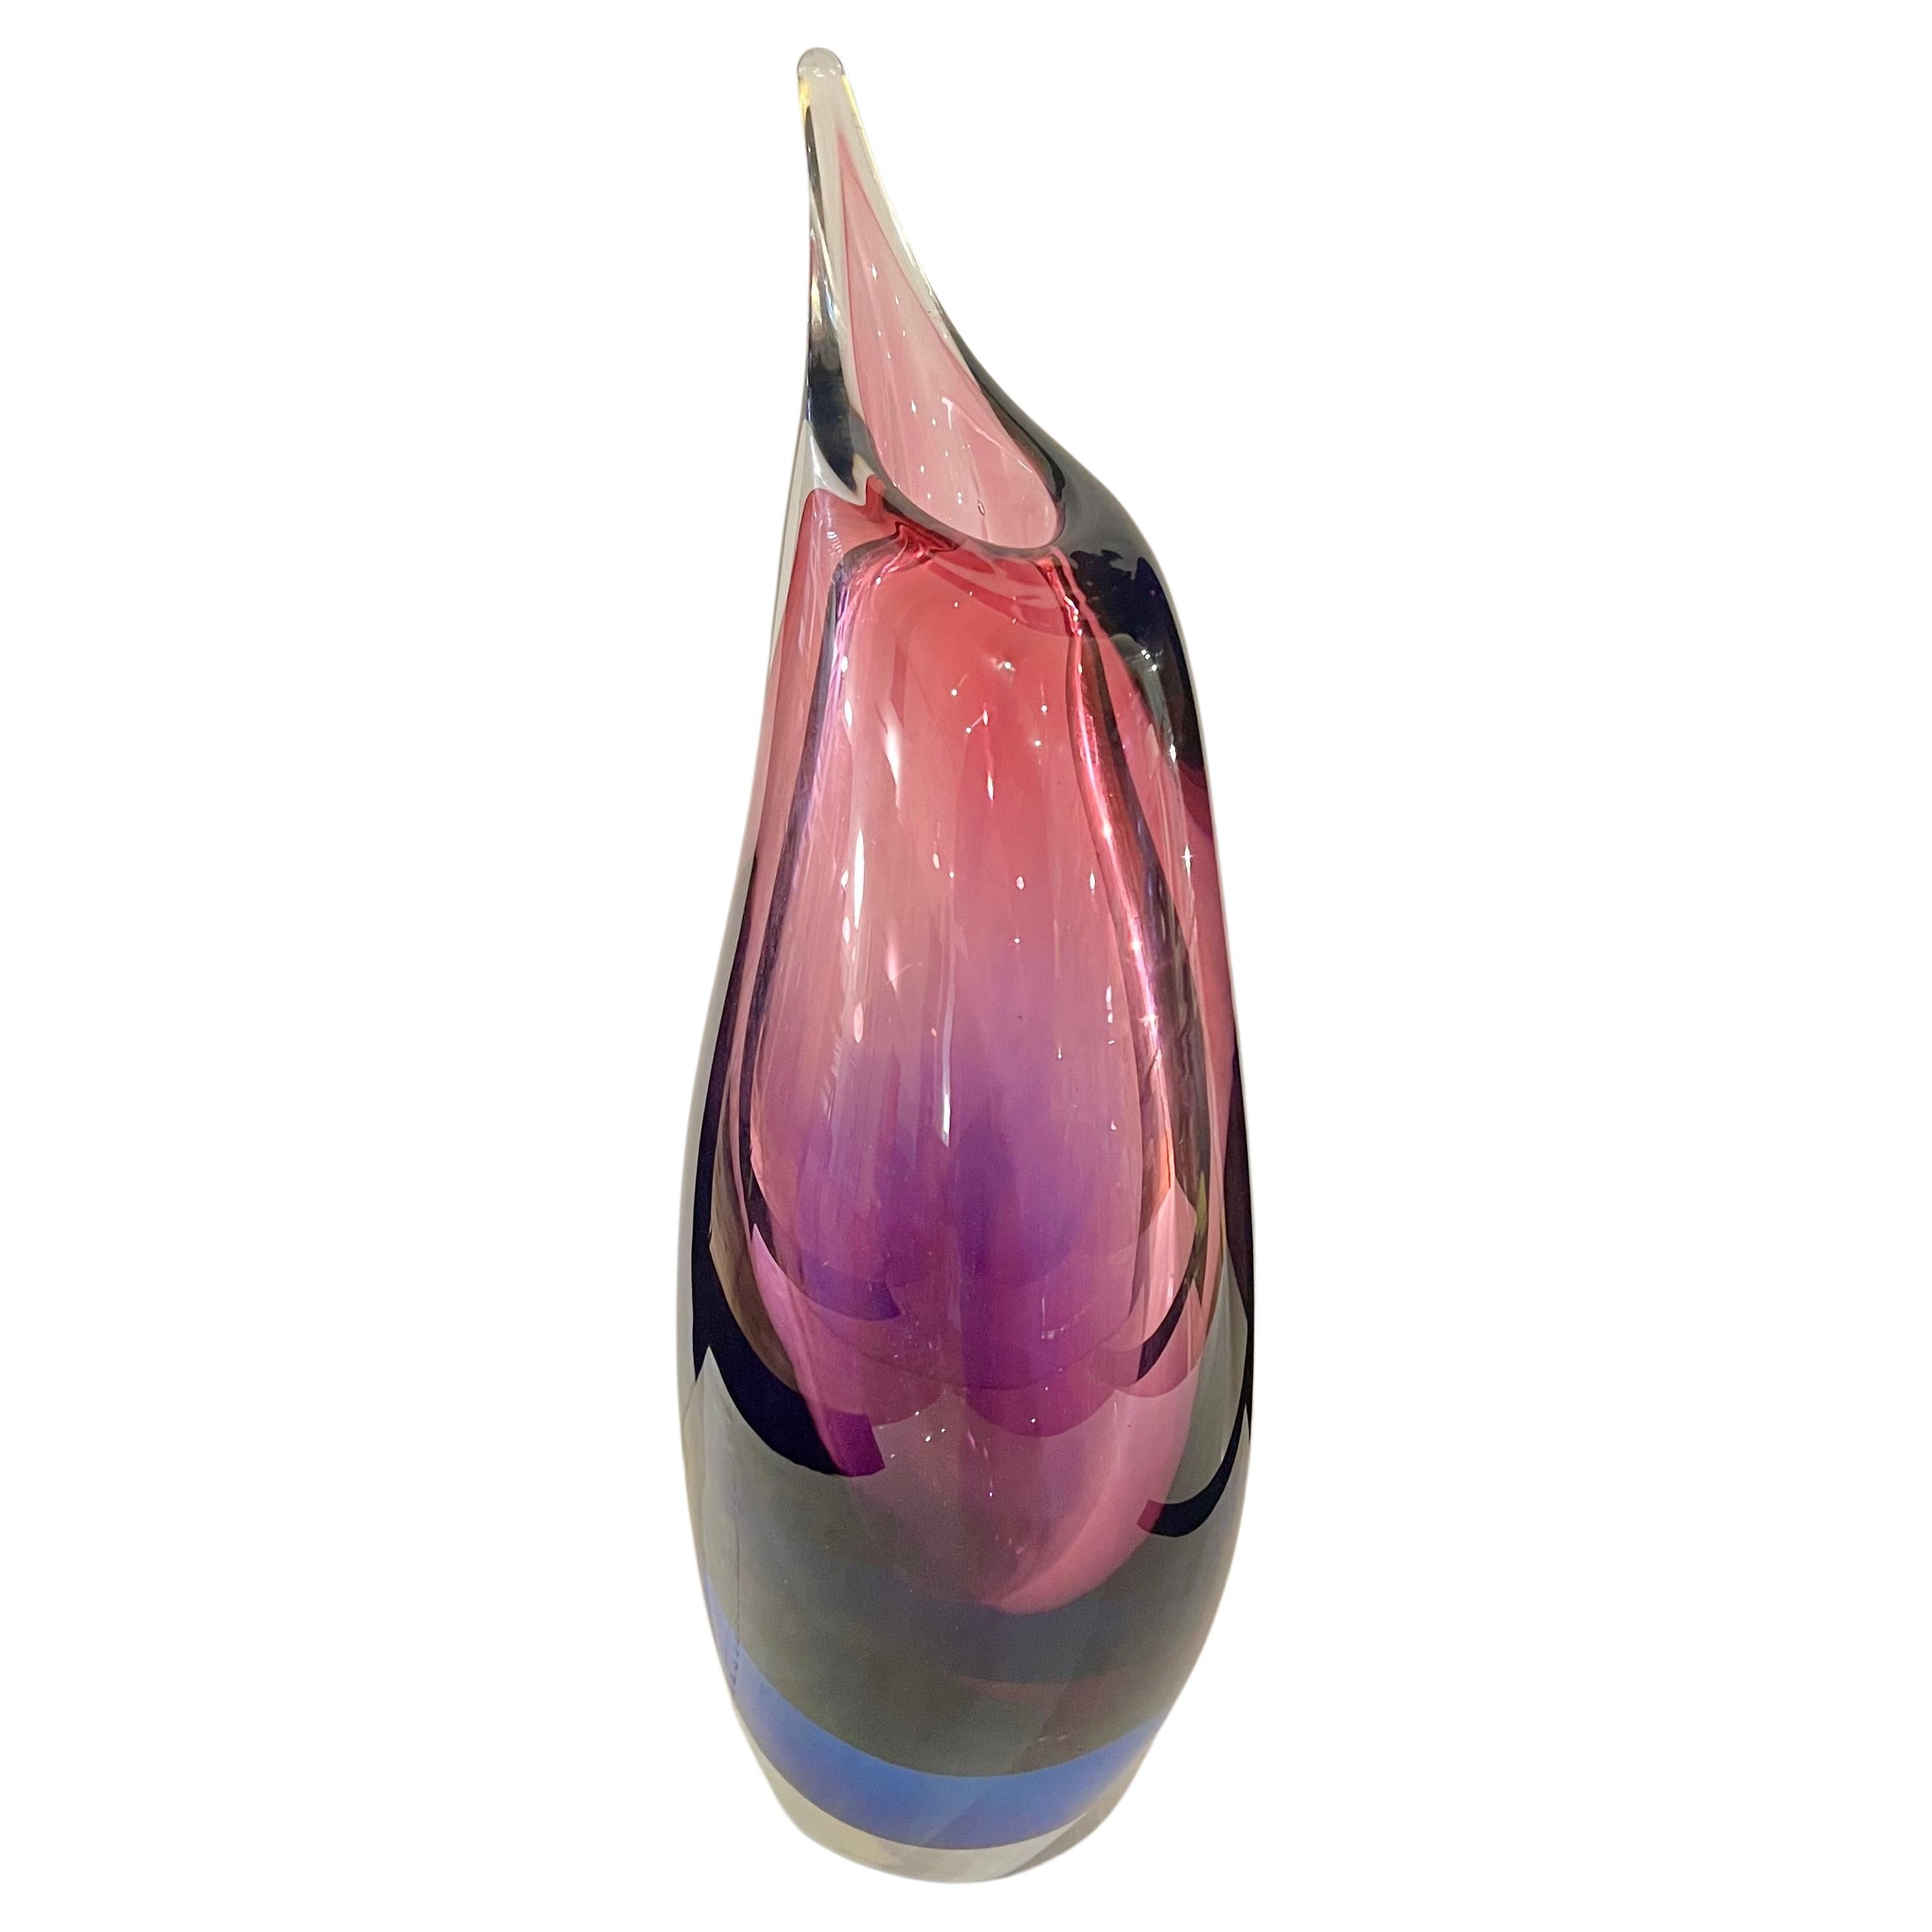 Majestic Large blown glass vase , tear drop shape circa 1970's excellent condition no chips or scratches beautiful colors , great Murano Italy Mid Century Modern Home decor.